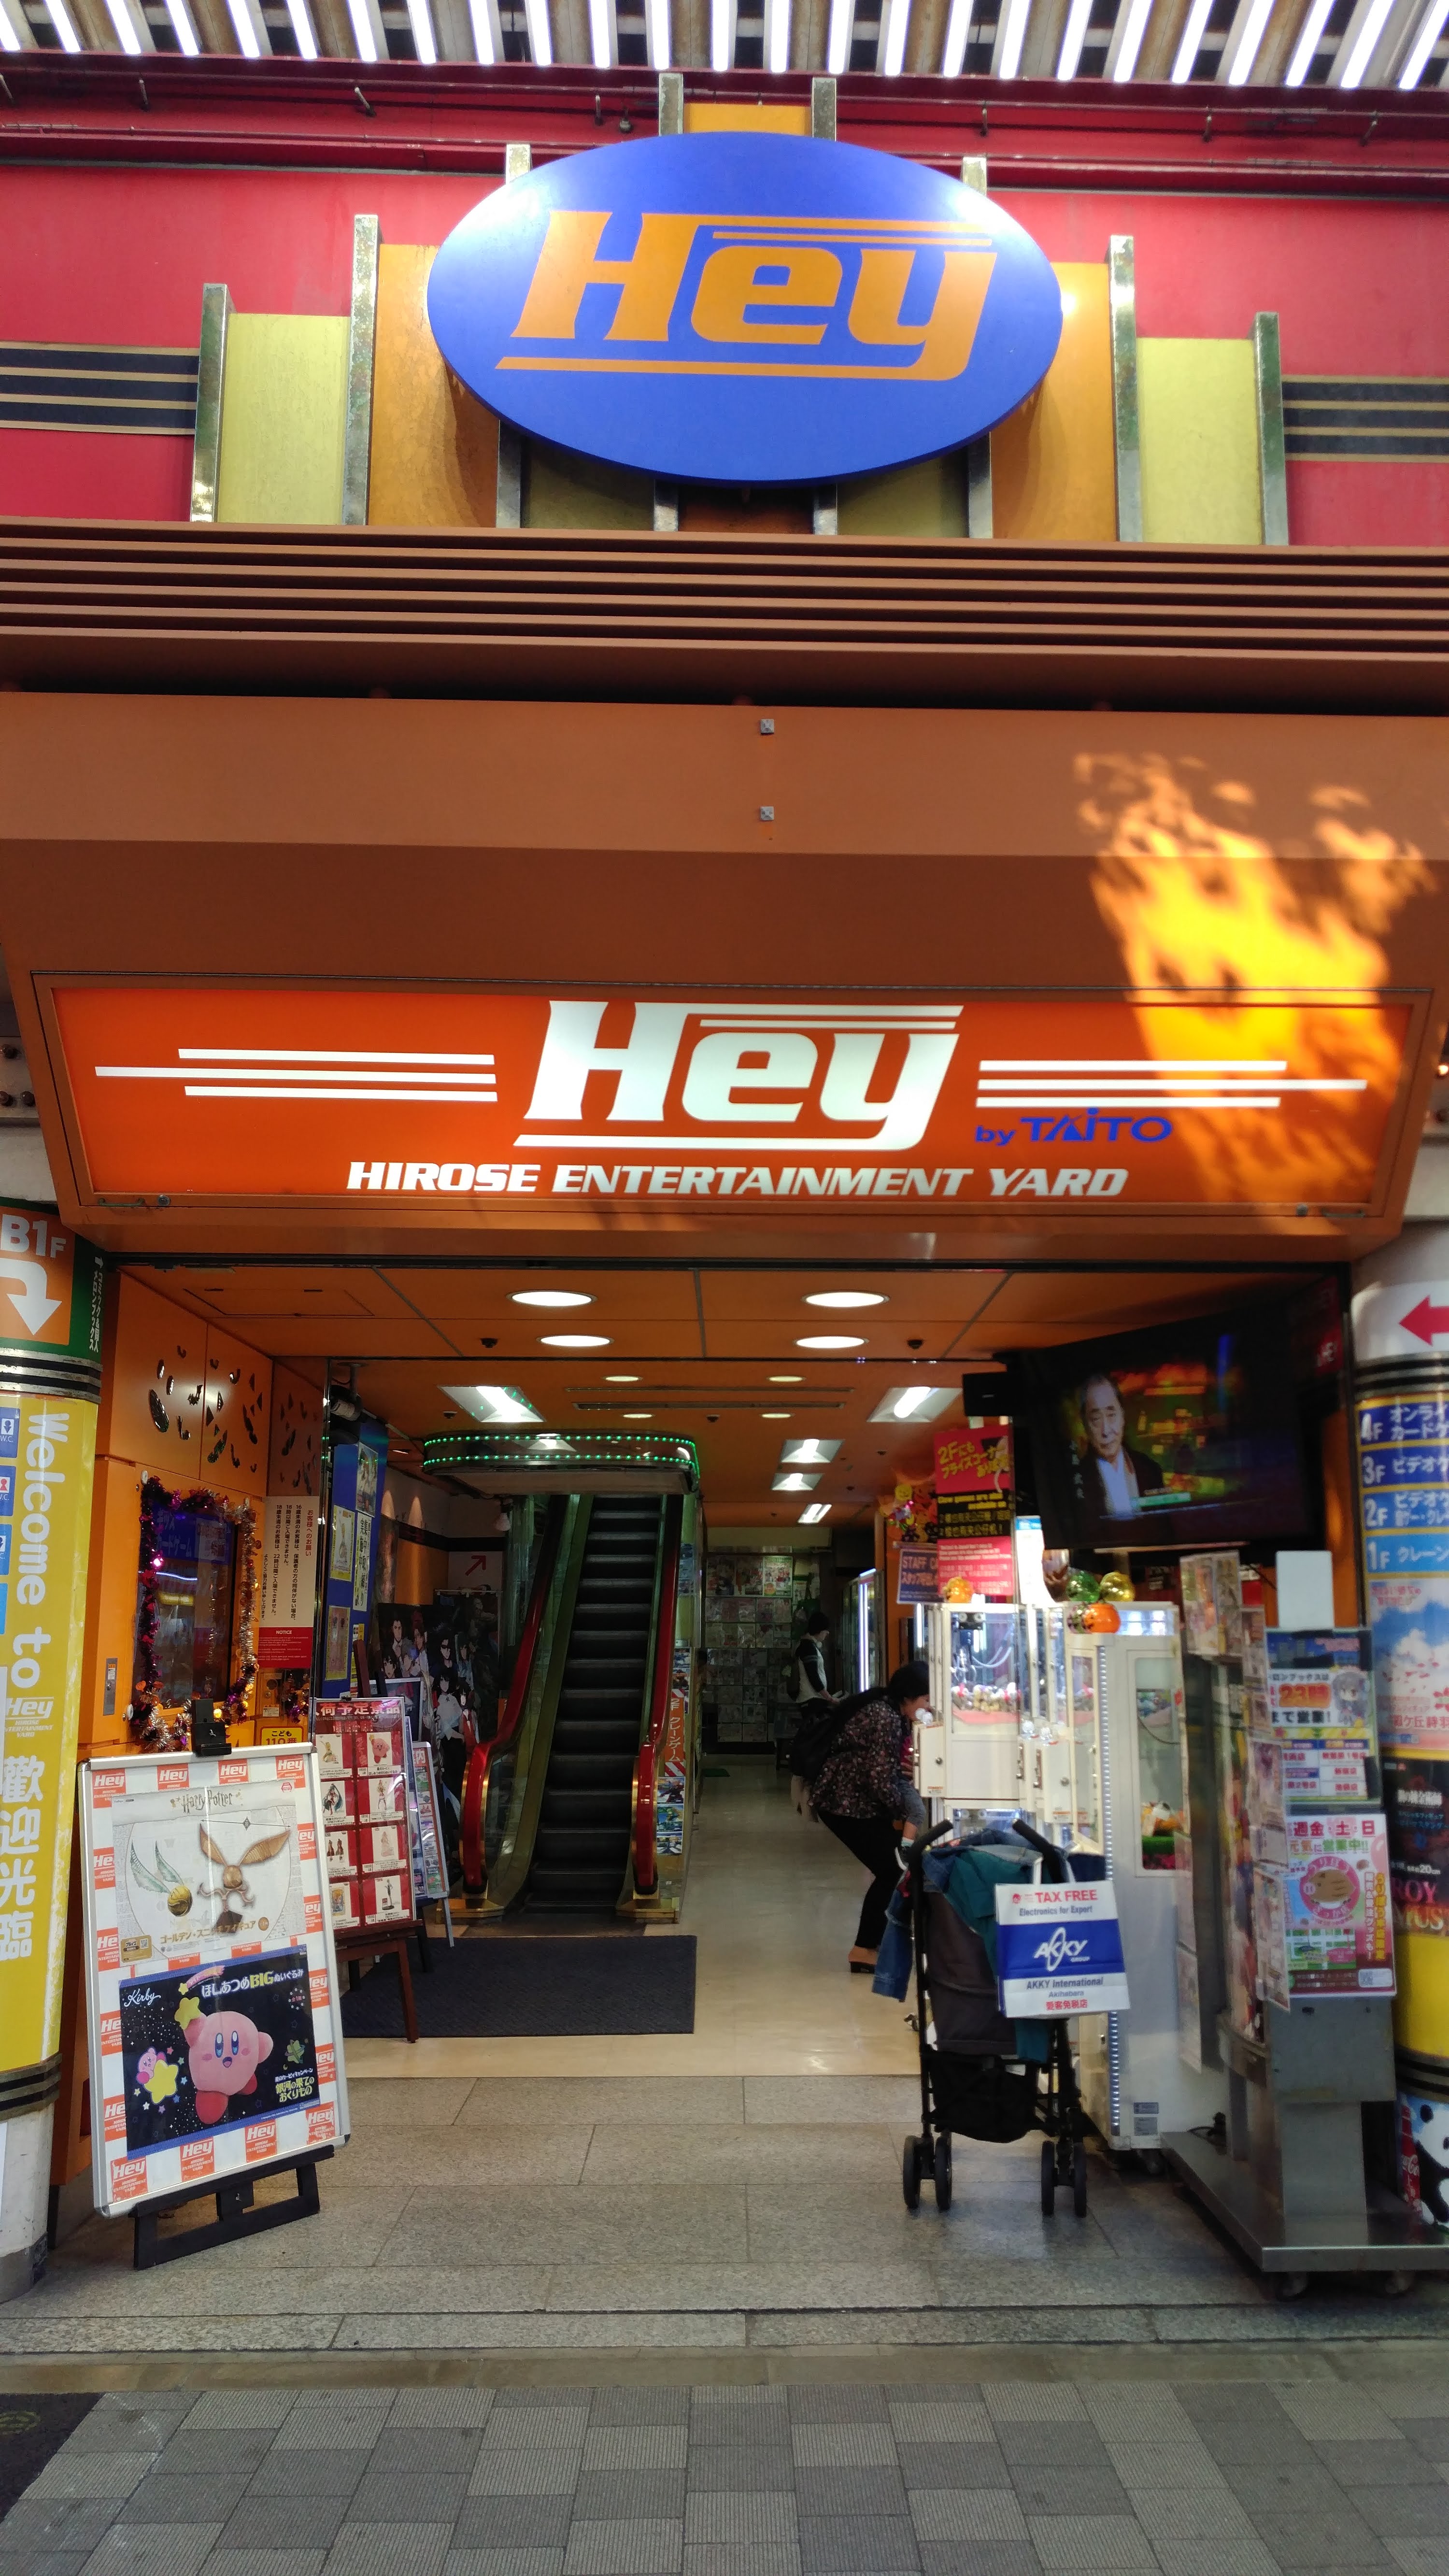 The doorway and signage of taito Hey